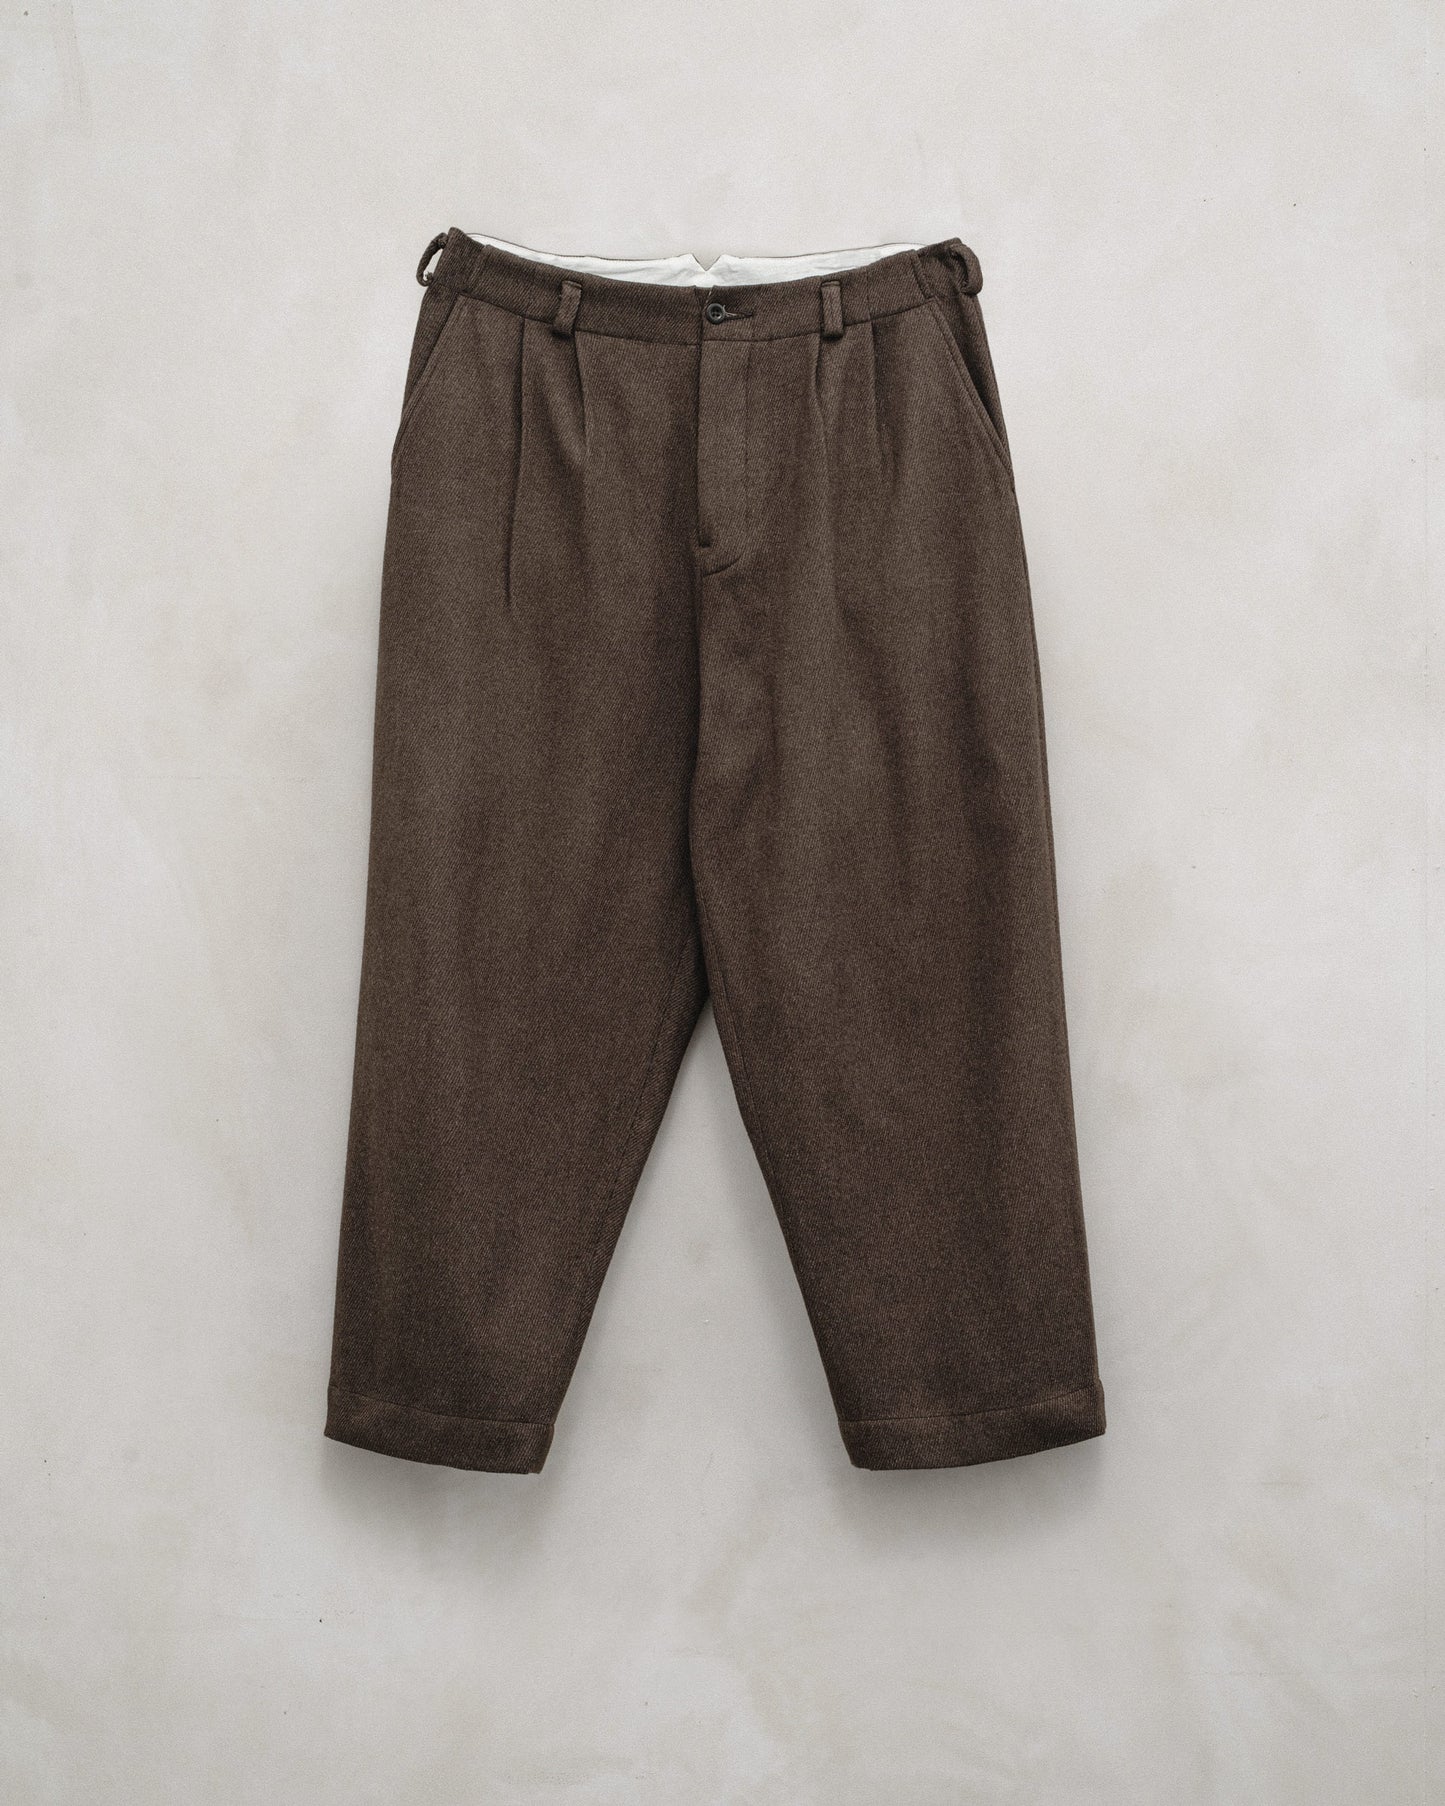 Two Pleat Pant - Yarn Dyed Wool/Cotton Twill, Olive Melange